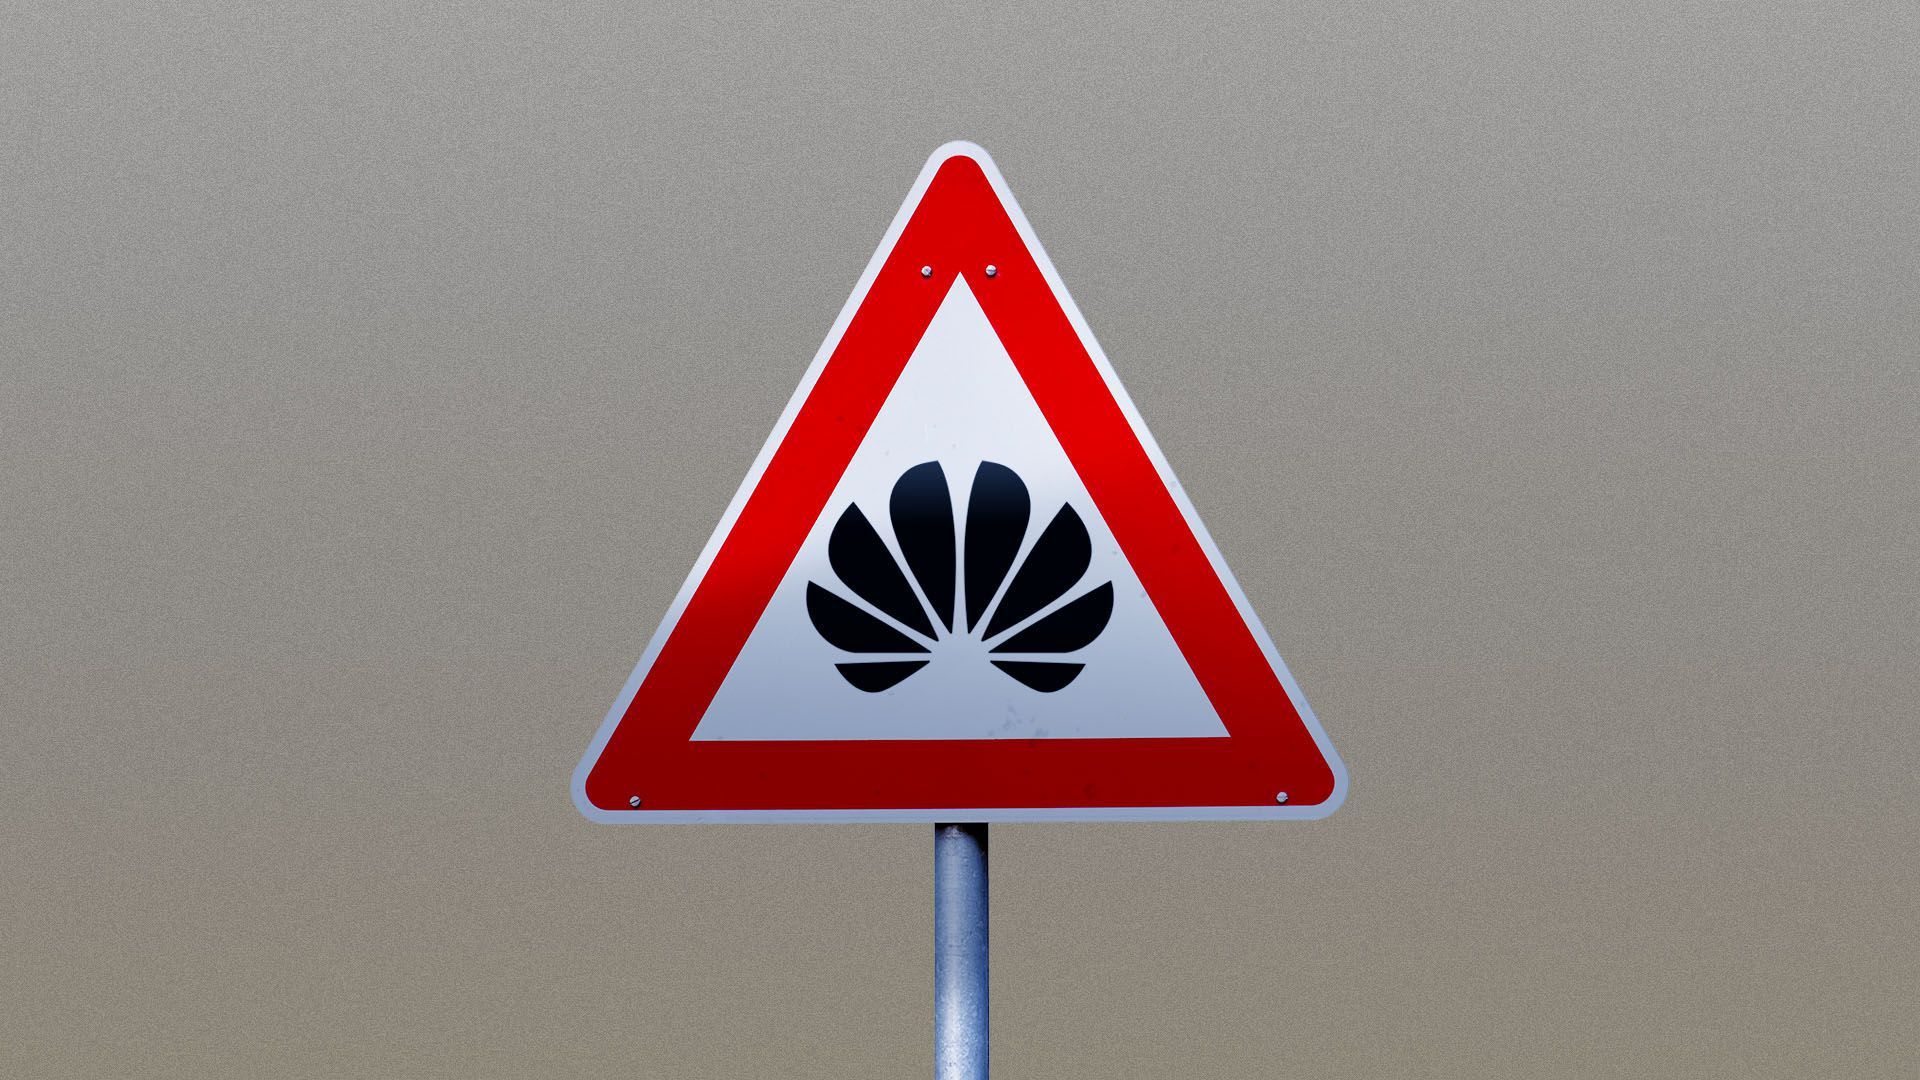 Huawei's logo on a traffic sign